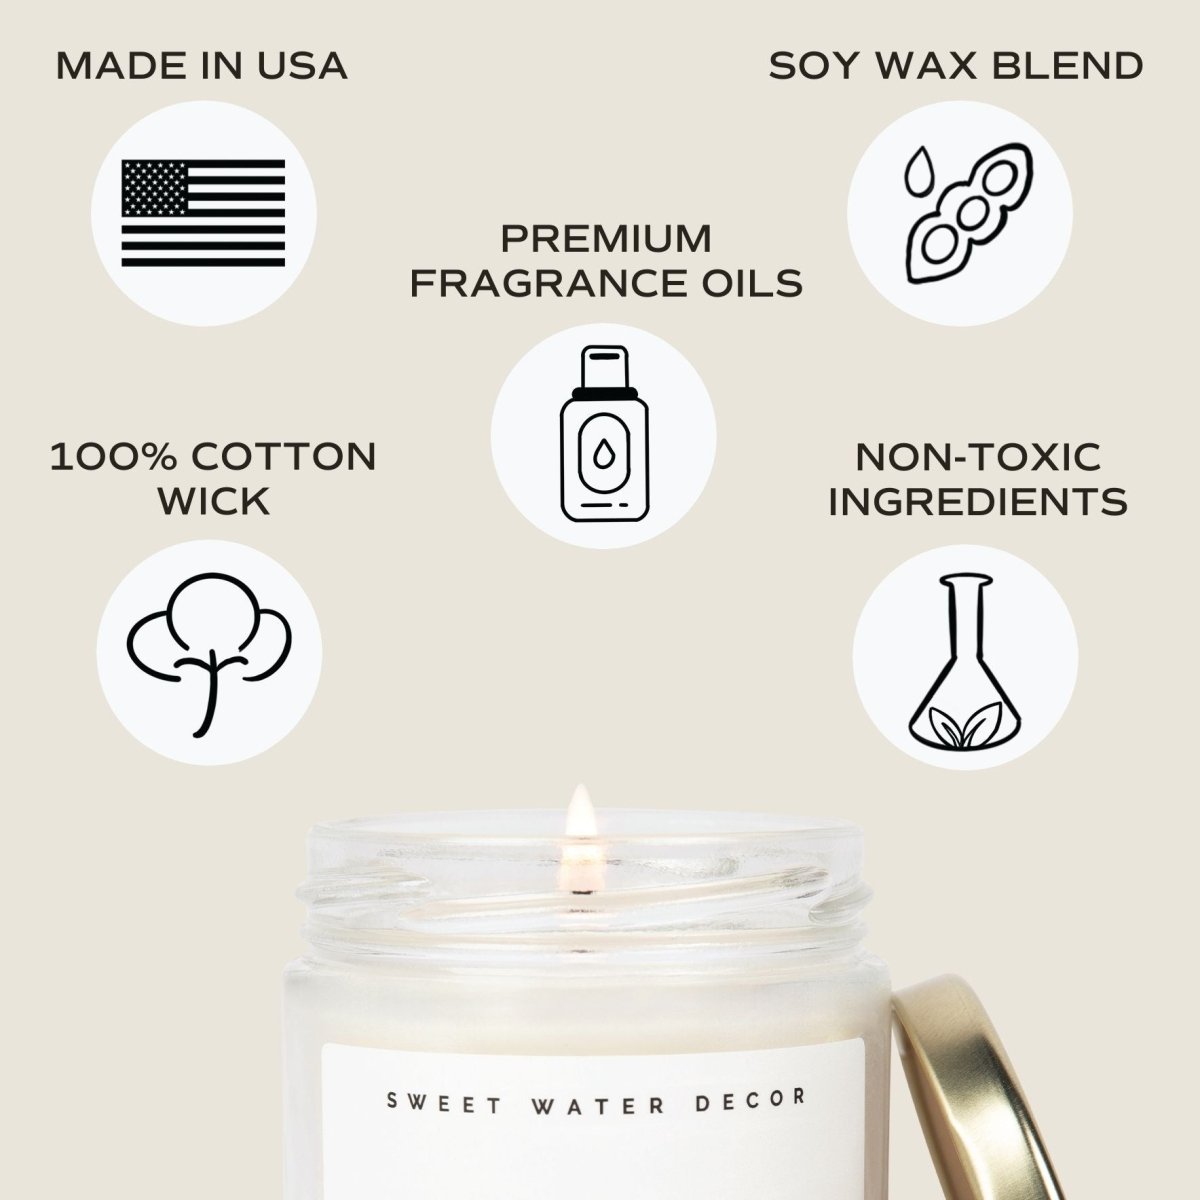 Load image into Gallery viewer, Sweet Water Decor Spa Day Soy Candle - Clear Jar - 9 oz - lily &amp;amp; onyx
